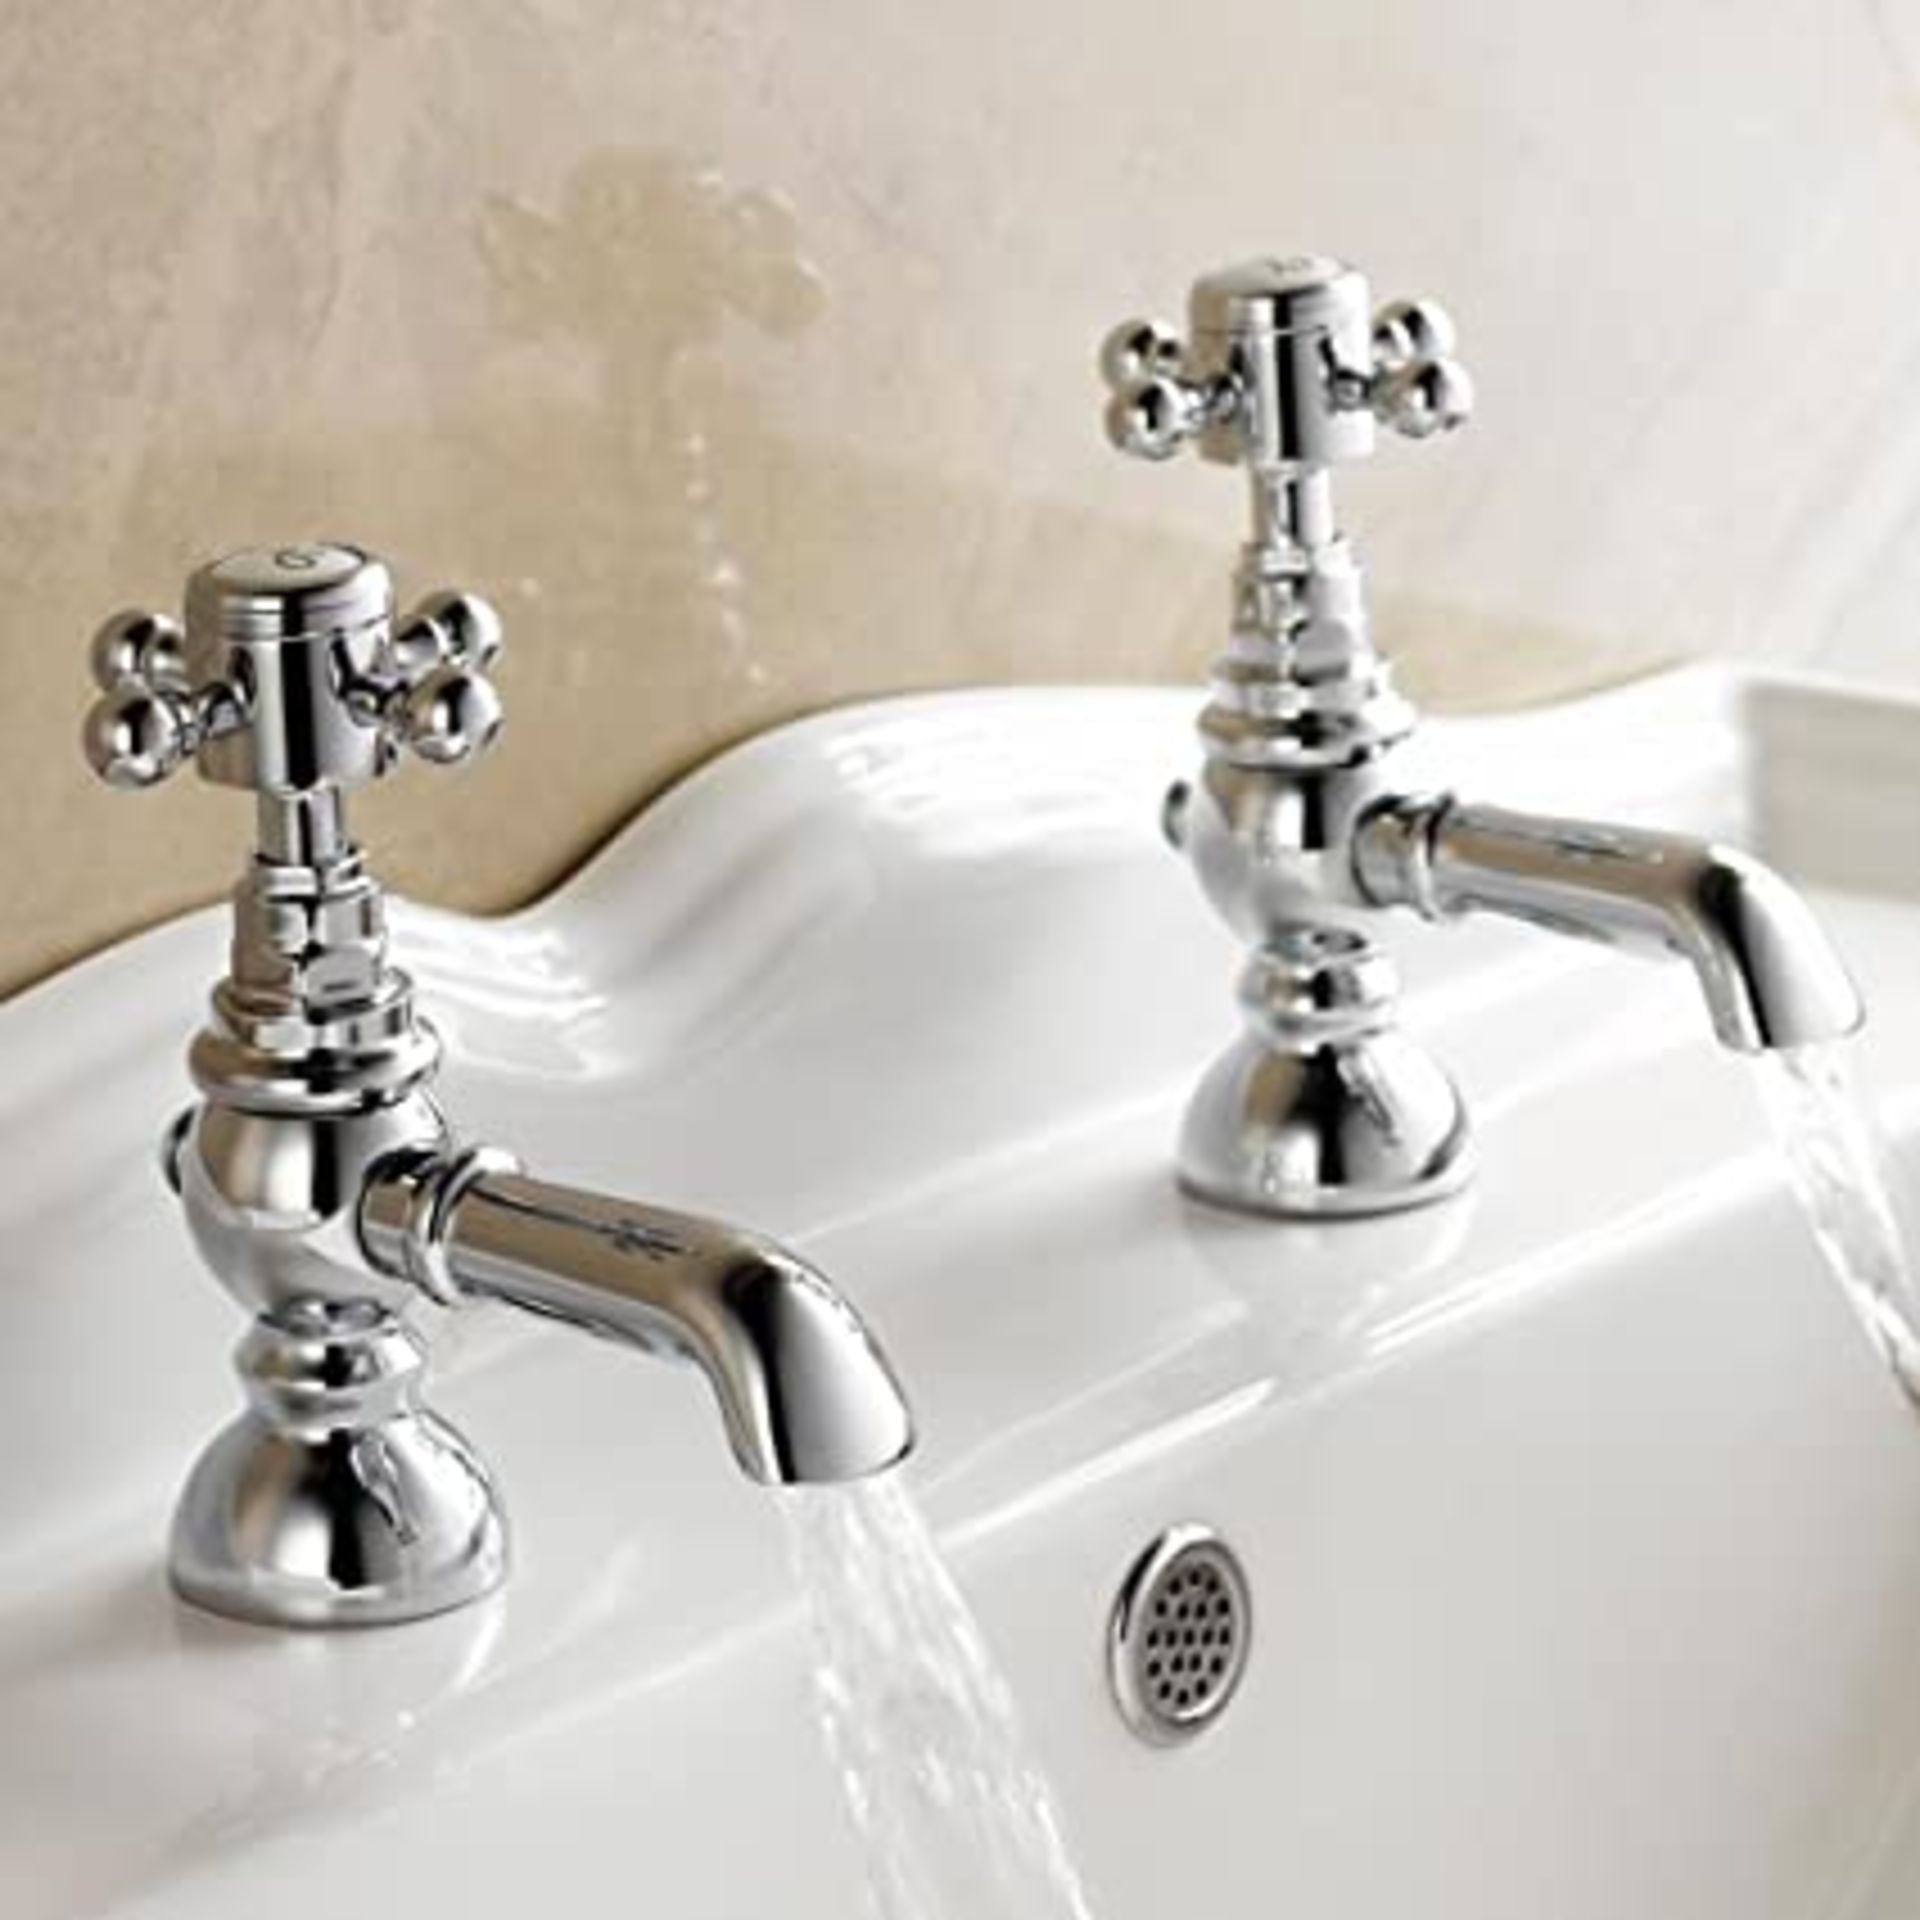 New & Boxed Traditional Pair Of Hot And Cold Basin Sink Taps Chrome Vintage Faucets. Tb31.Idea... - Image 2 of 2